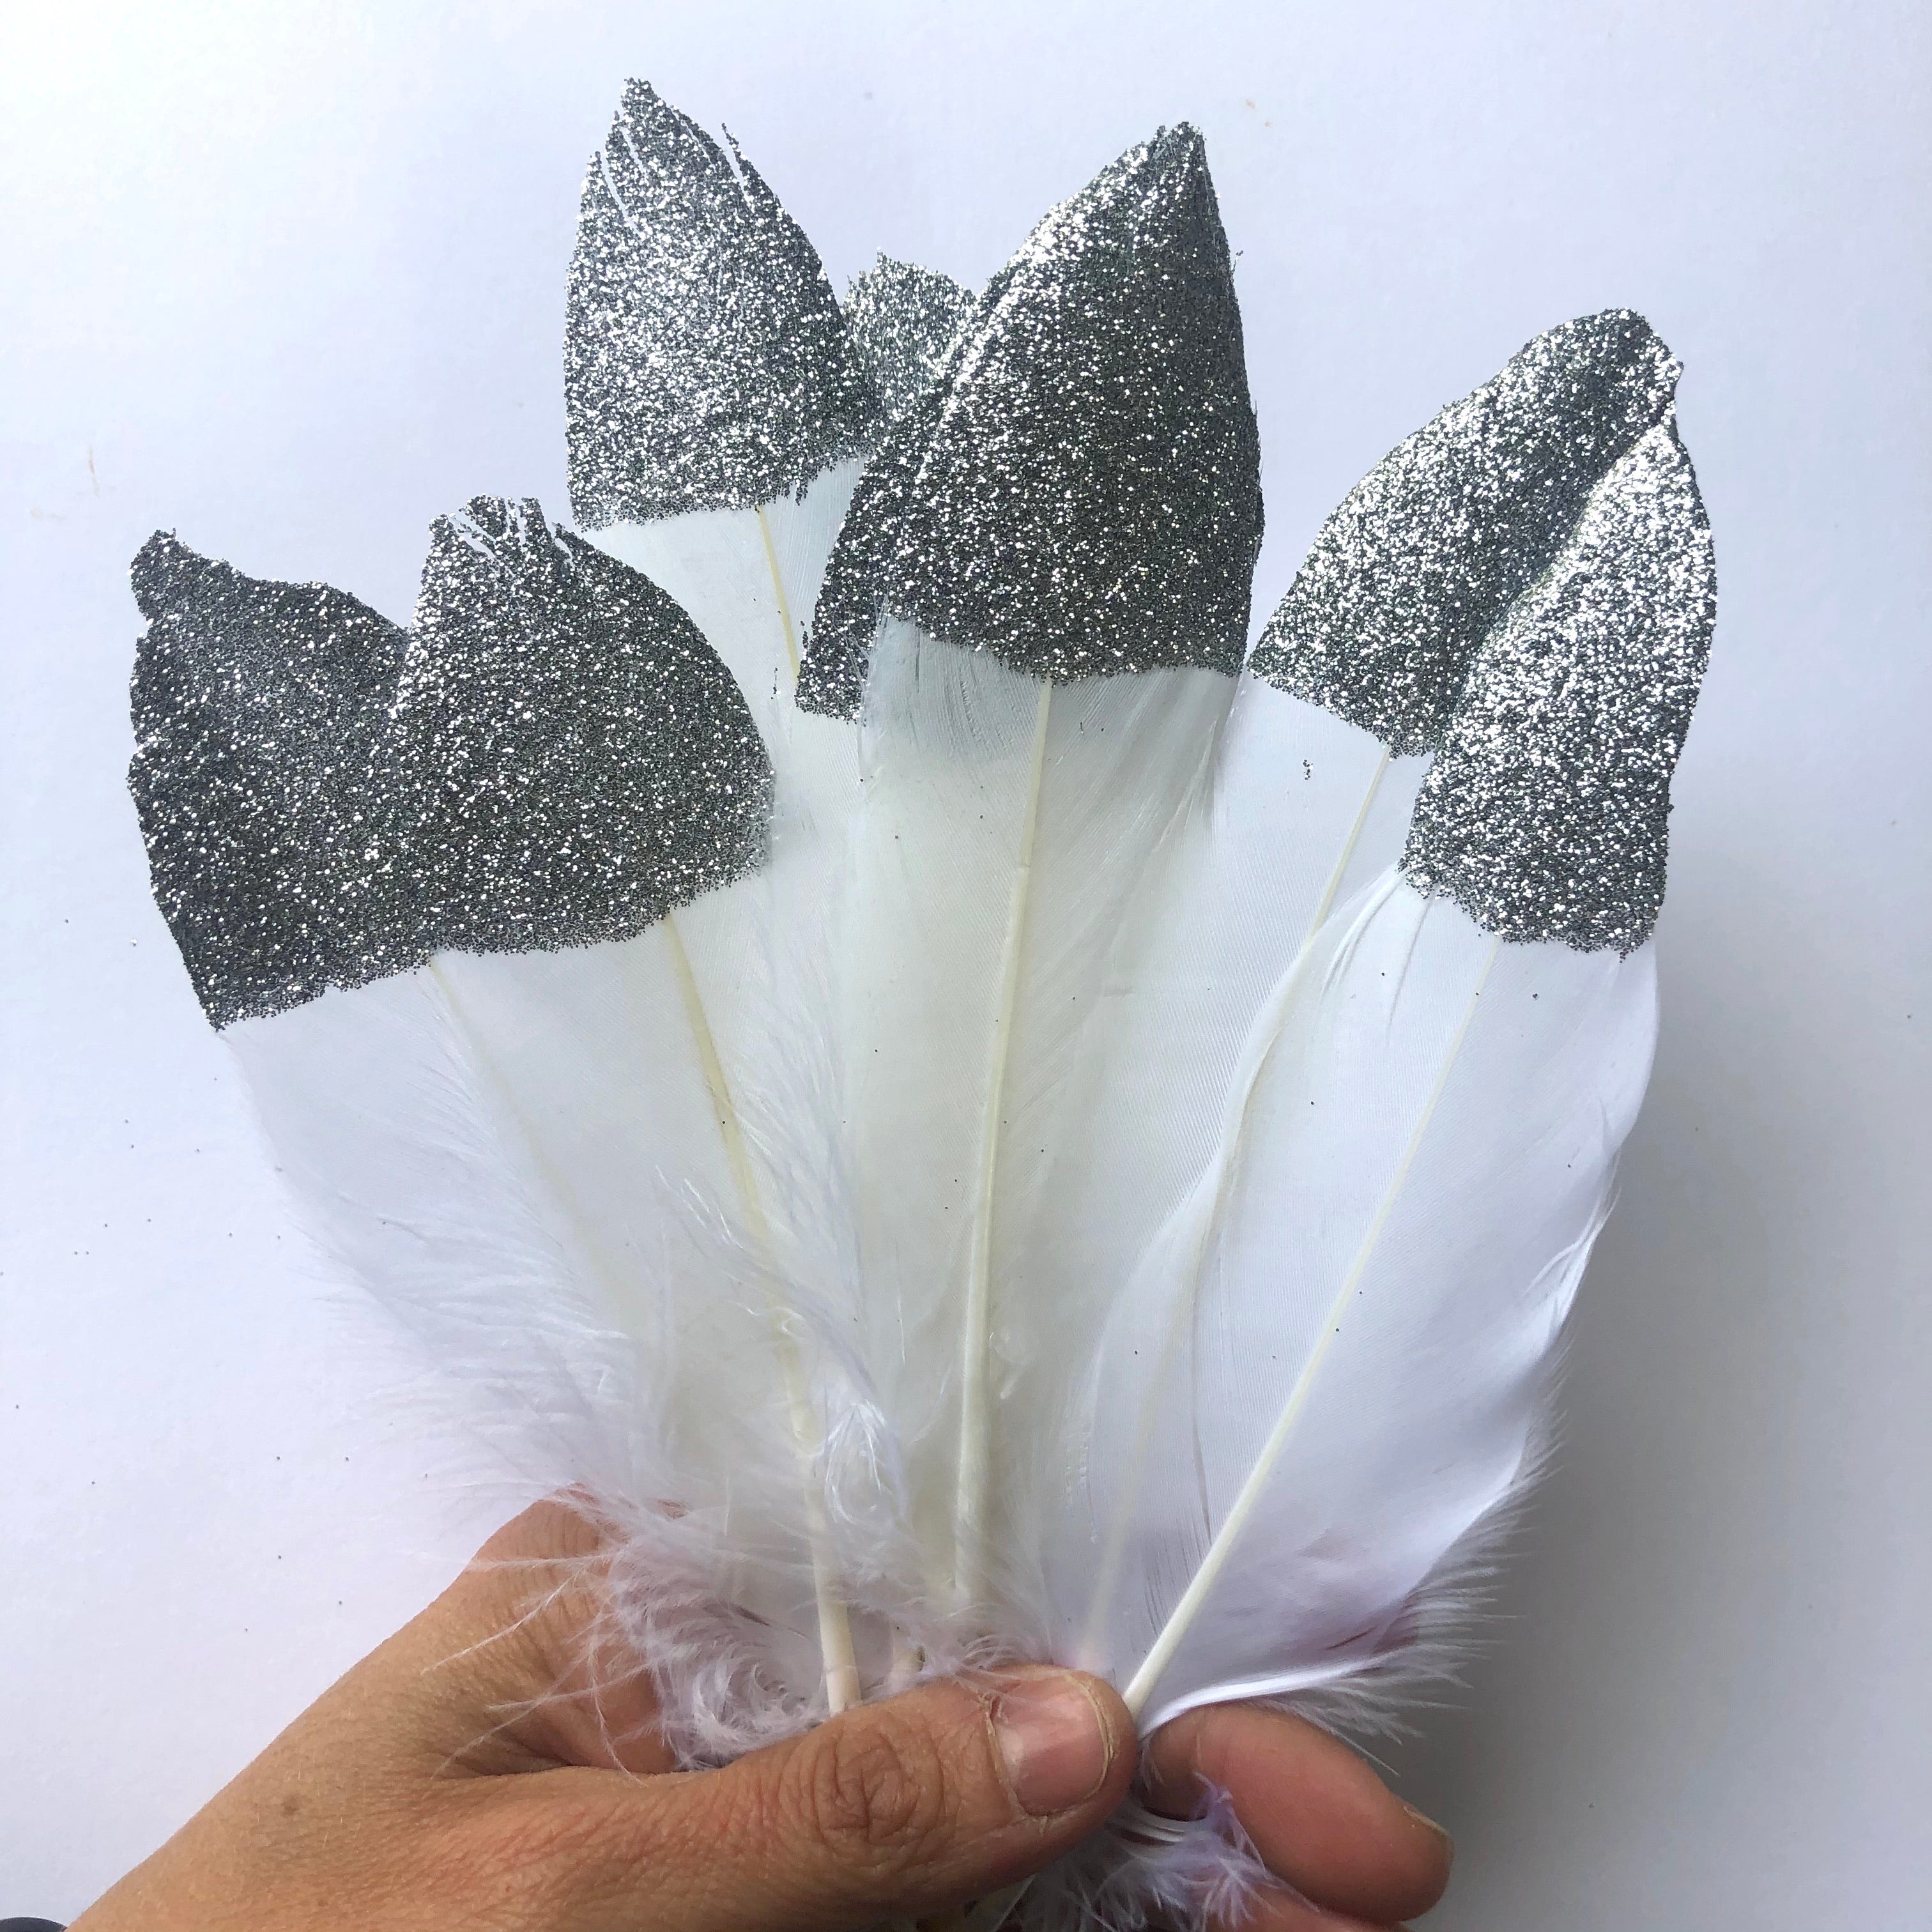 Goose Pointer Feather Glitter Tipped x 10 pcs - White with Silver - Style 28